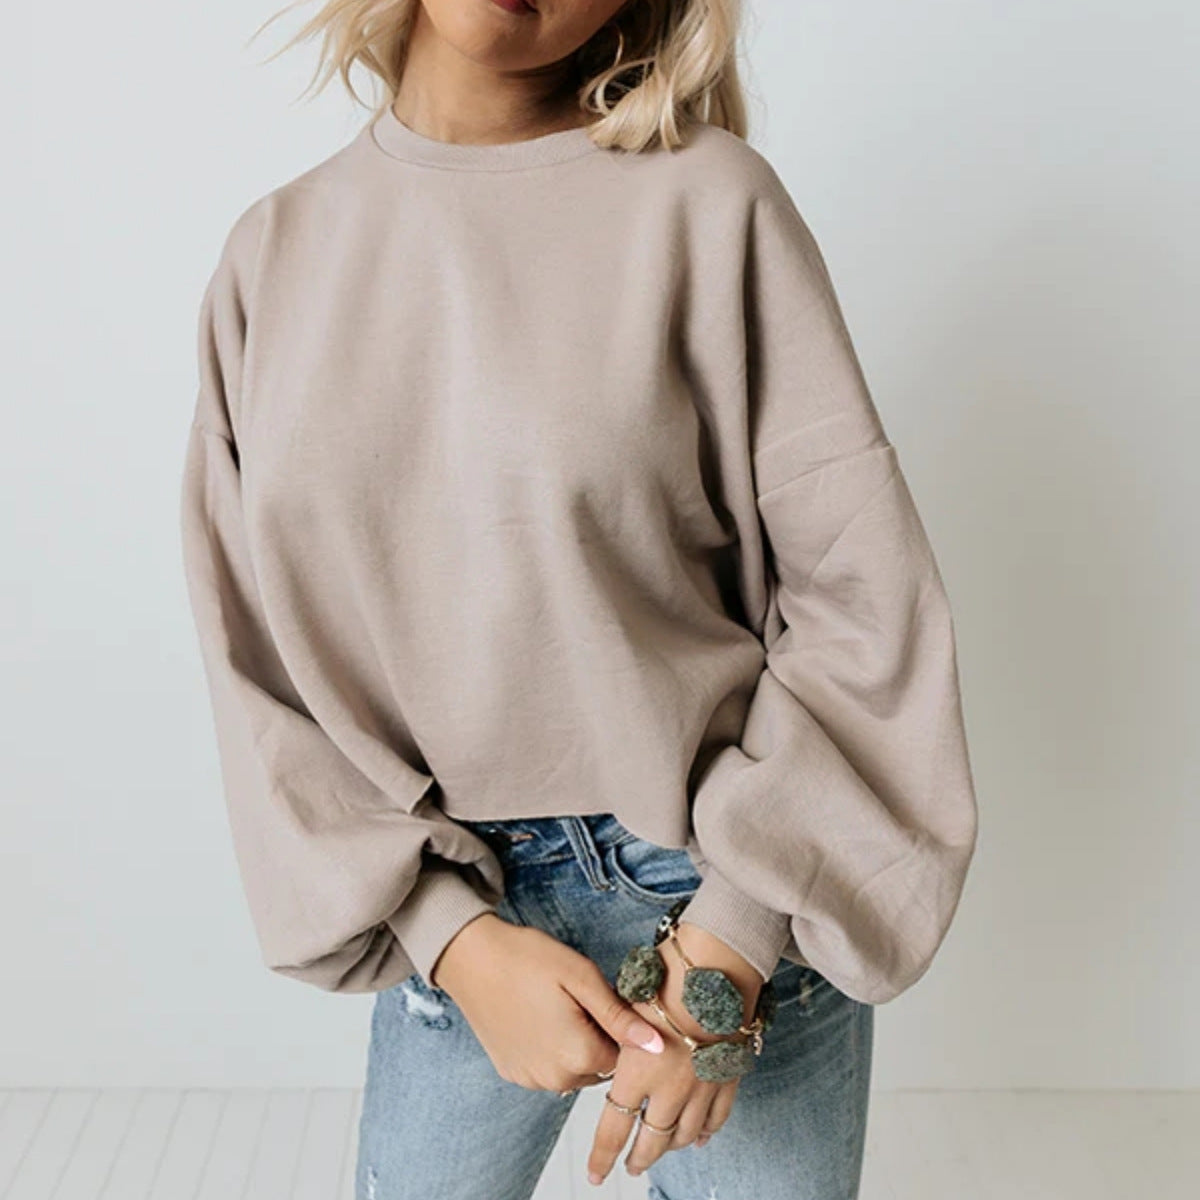 Women's Stylish Loose Round Neck Solid Color Long-sleeved Top